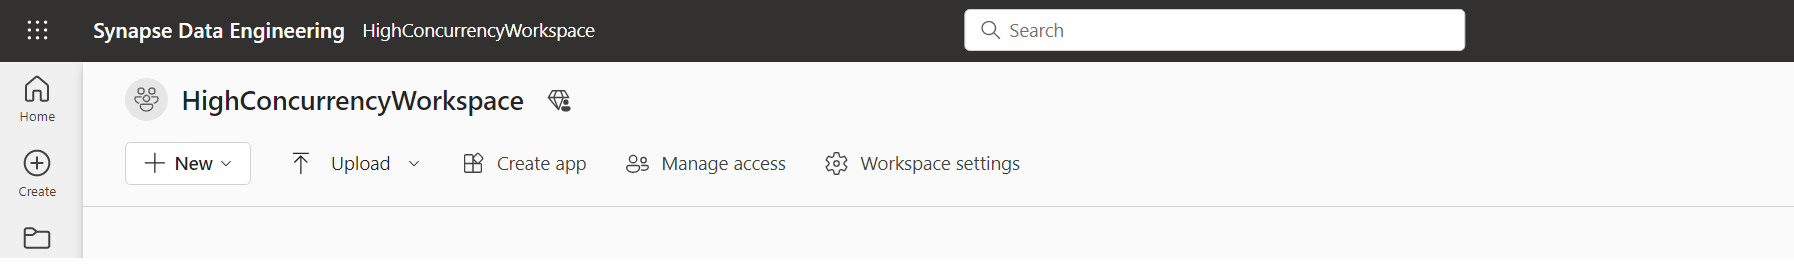 Screenshot showing the navigation to workspace settings.